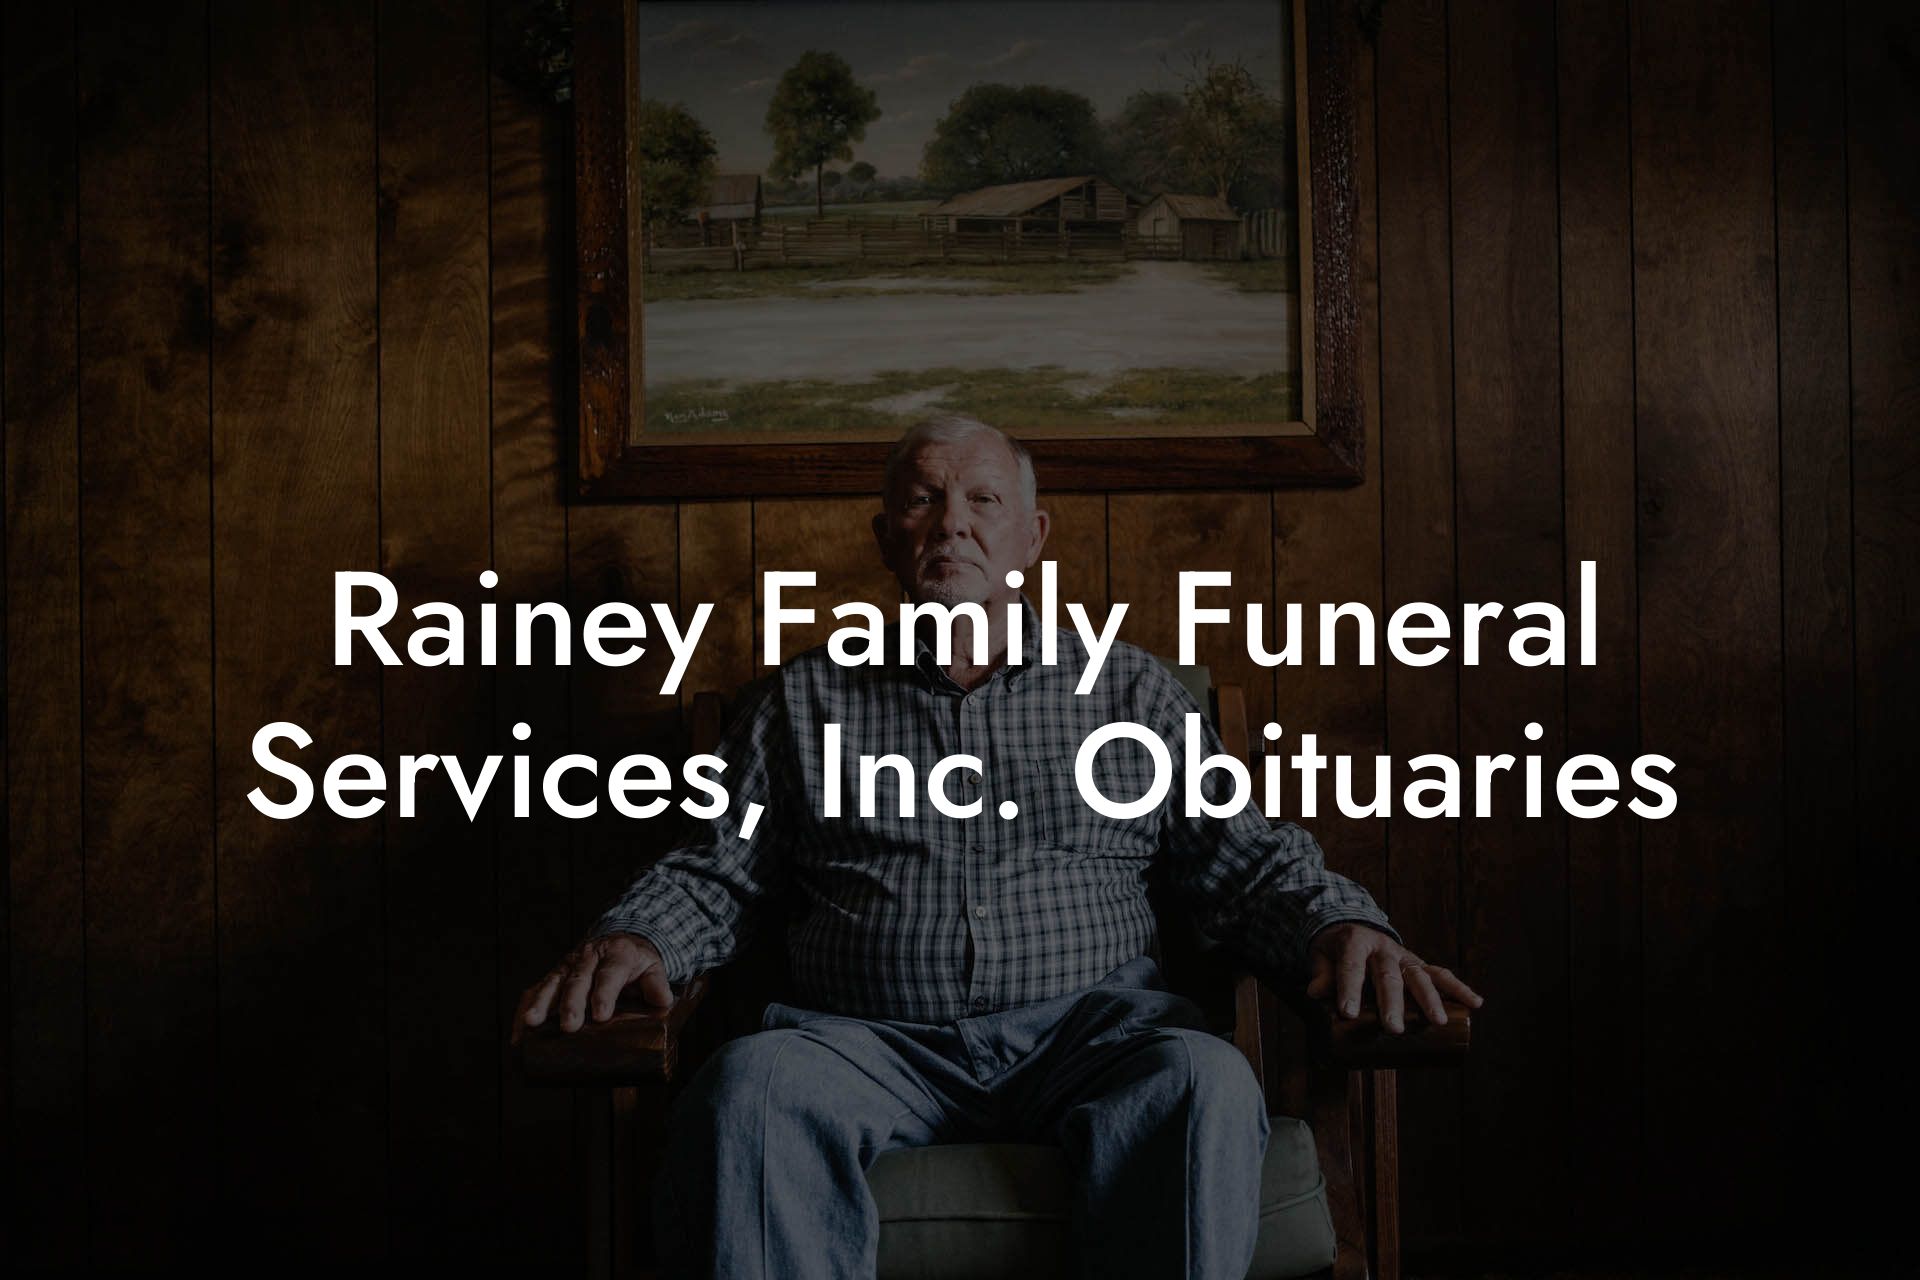 Rainey Family Funeral Services, Inc. Obituaries